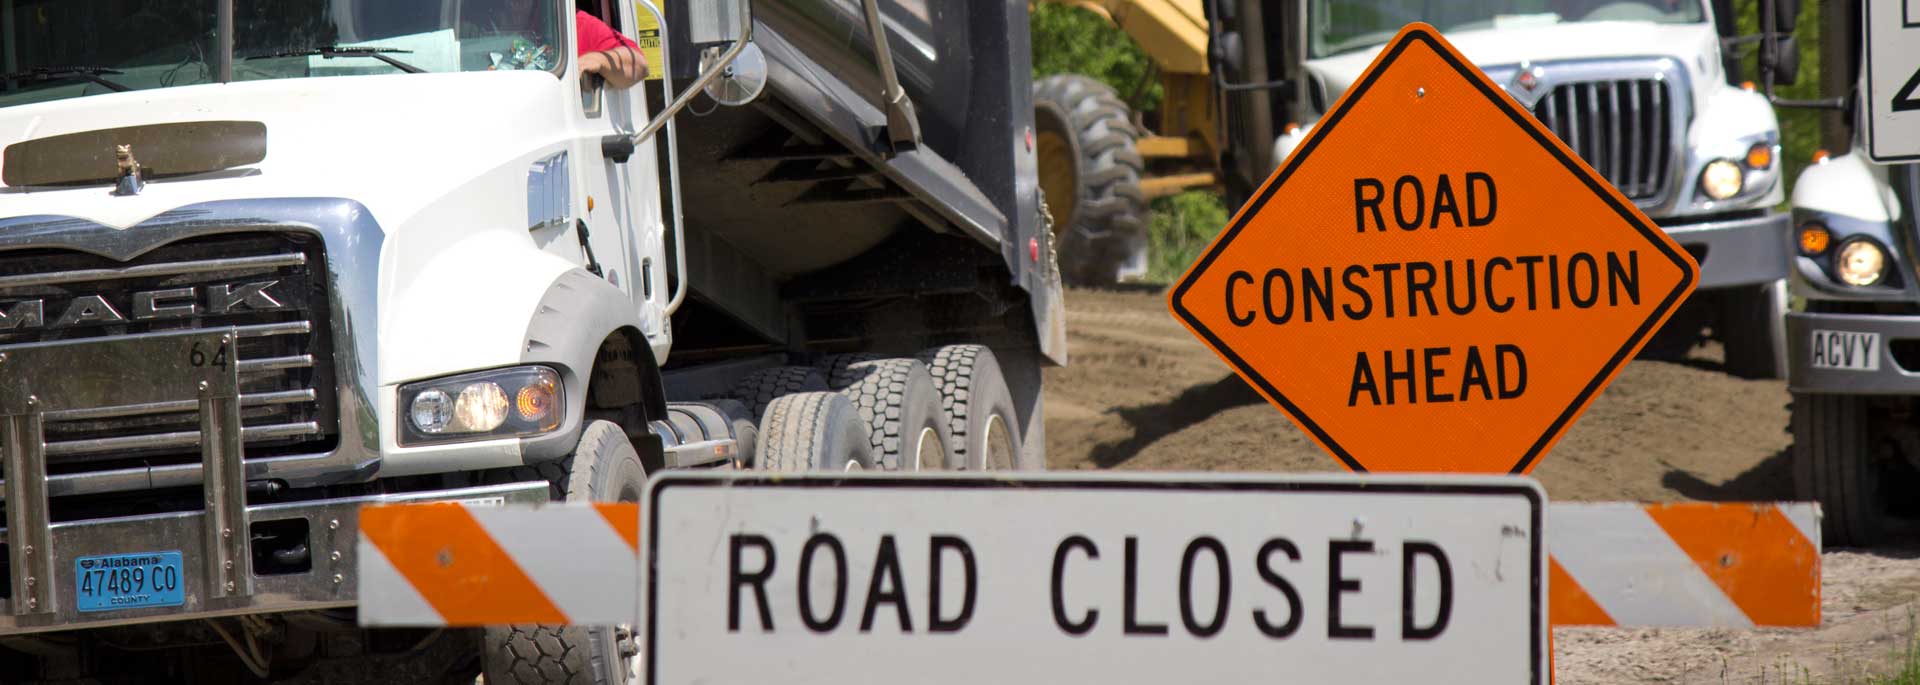 dump trucks on county road with signs reading Road Construction ahead, and  Road Closed.